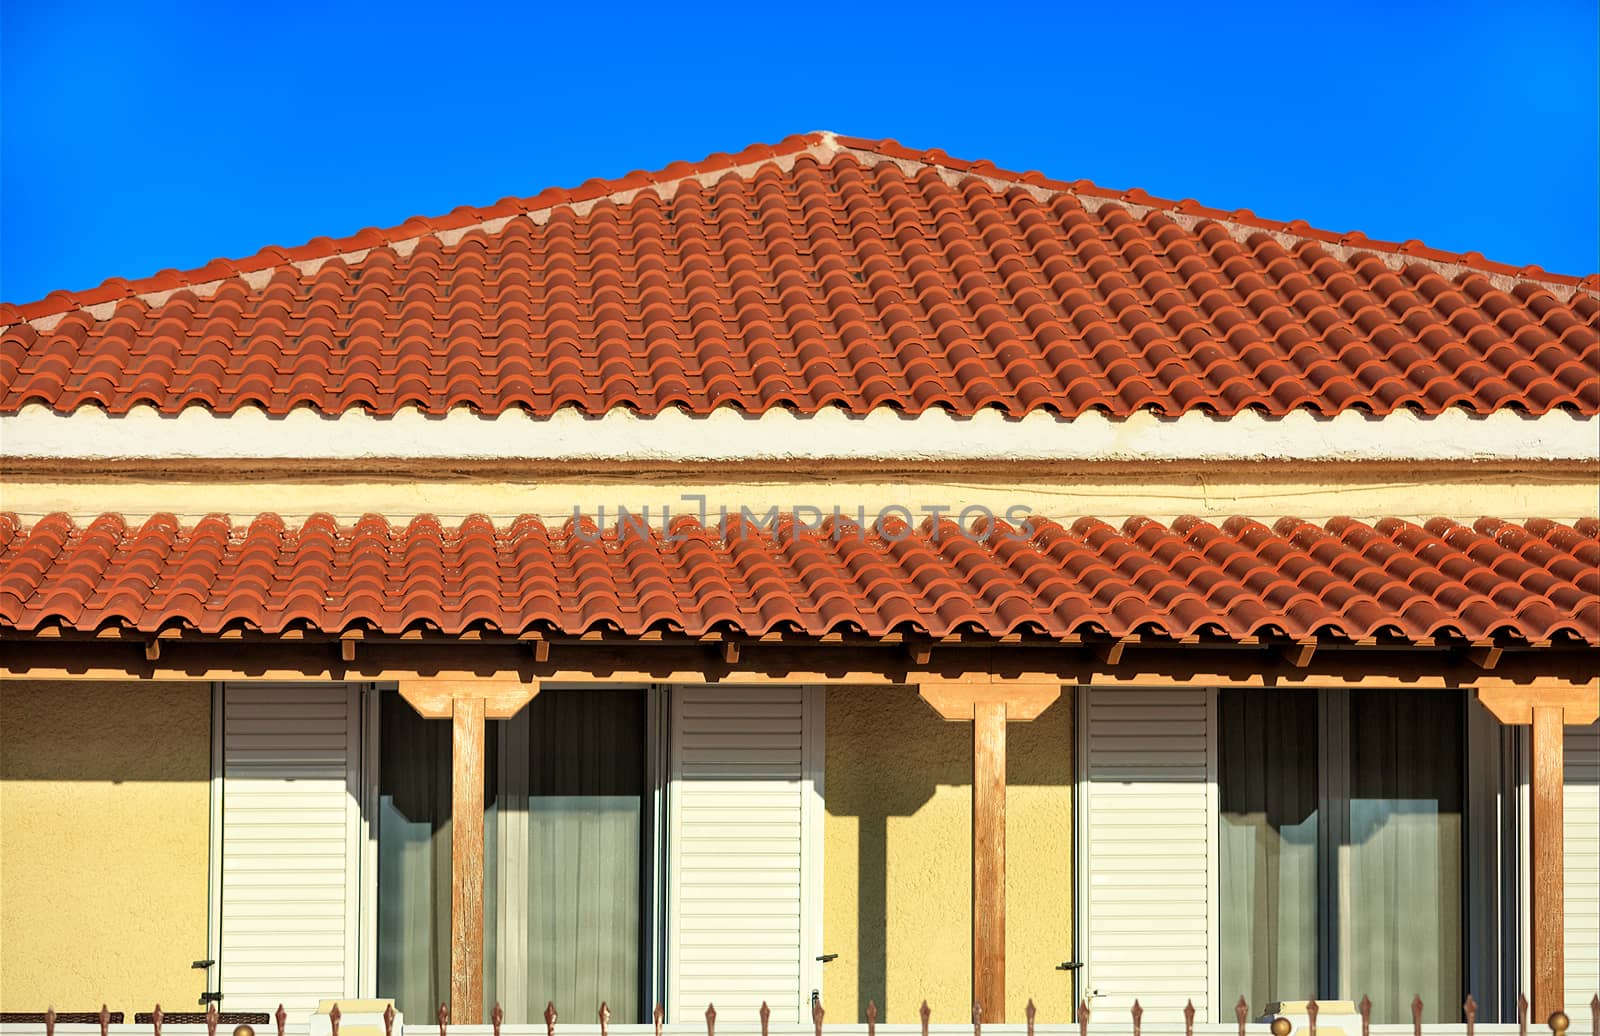 Sloped light brown clay tile roof of a rural traditional one-story house in southern Greece is covered with brown tiles against a blue sky.